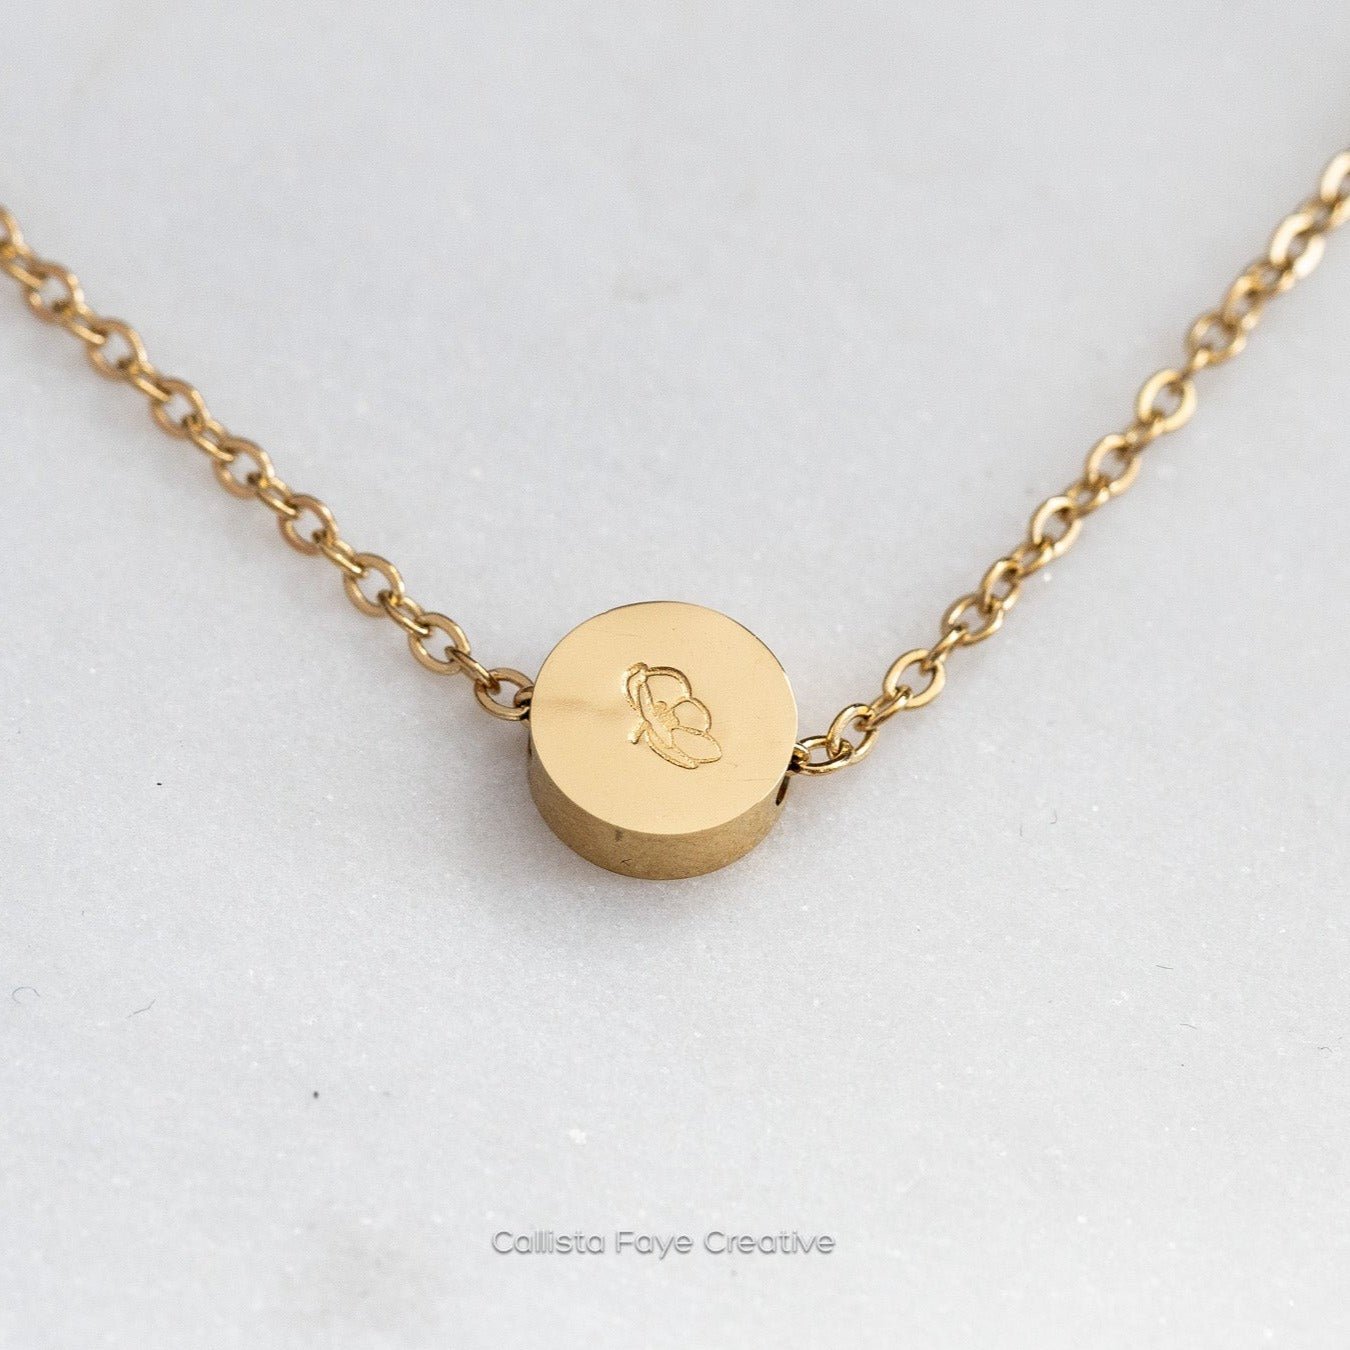 Custom Initial, Birth Flower Mini Coin Bead Necklace, Personalized Necklaces callistafaye 1 Bead Gold 